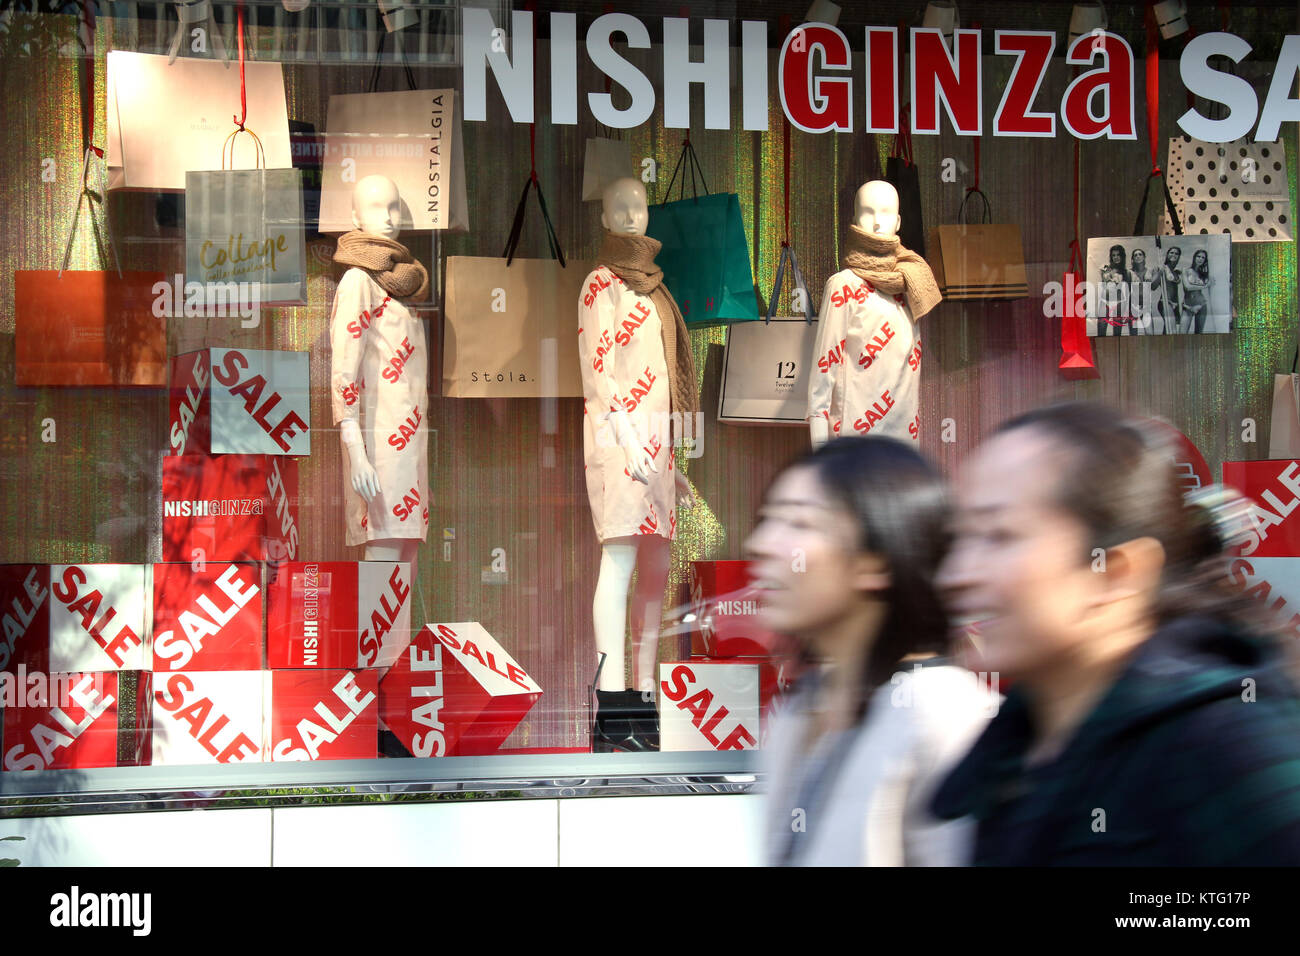 Tokyo, Japan. 26th Dec, 2017. Pedestrians pass before an aparel shop in Tokyo on Tuesday, December 26, 2017. Japan's consumer price index rose 0.9 percent in November, increasing 11th consecutive month, the government announced on December 26. Credit: Yoshio Tsunoda/AFLO/Alamy Live News Stock Photo